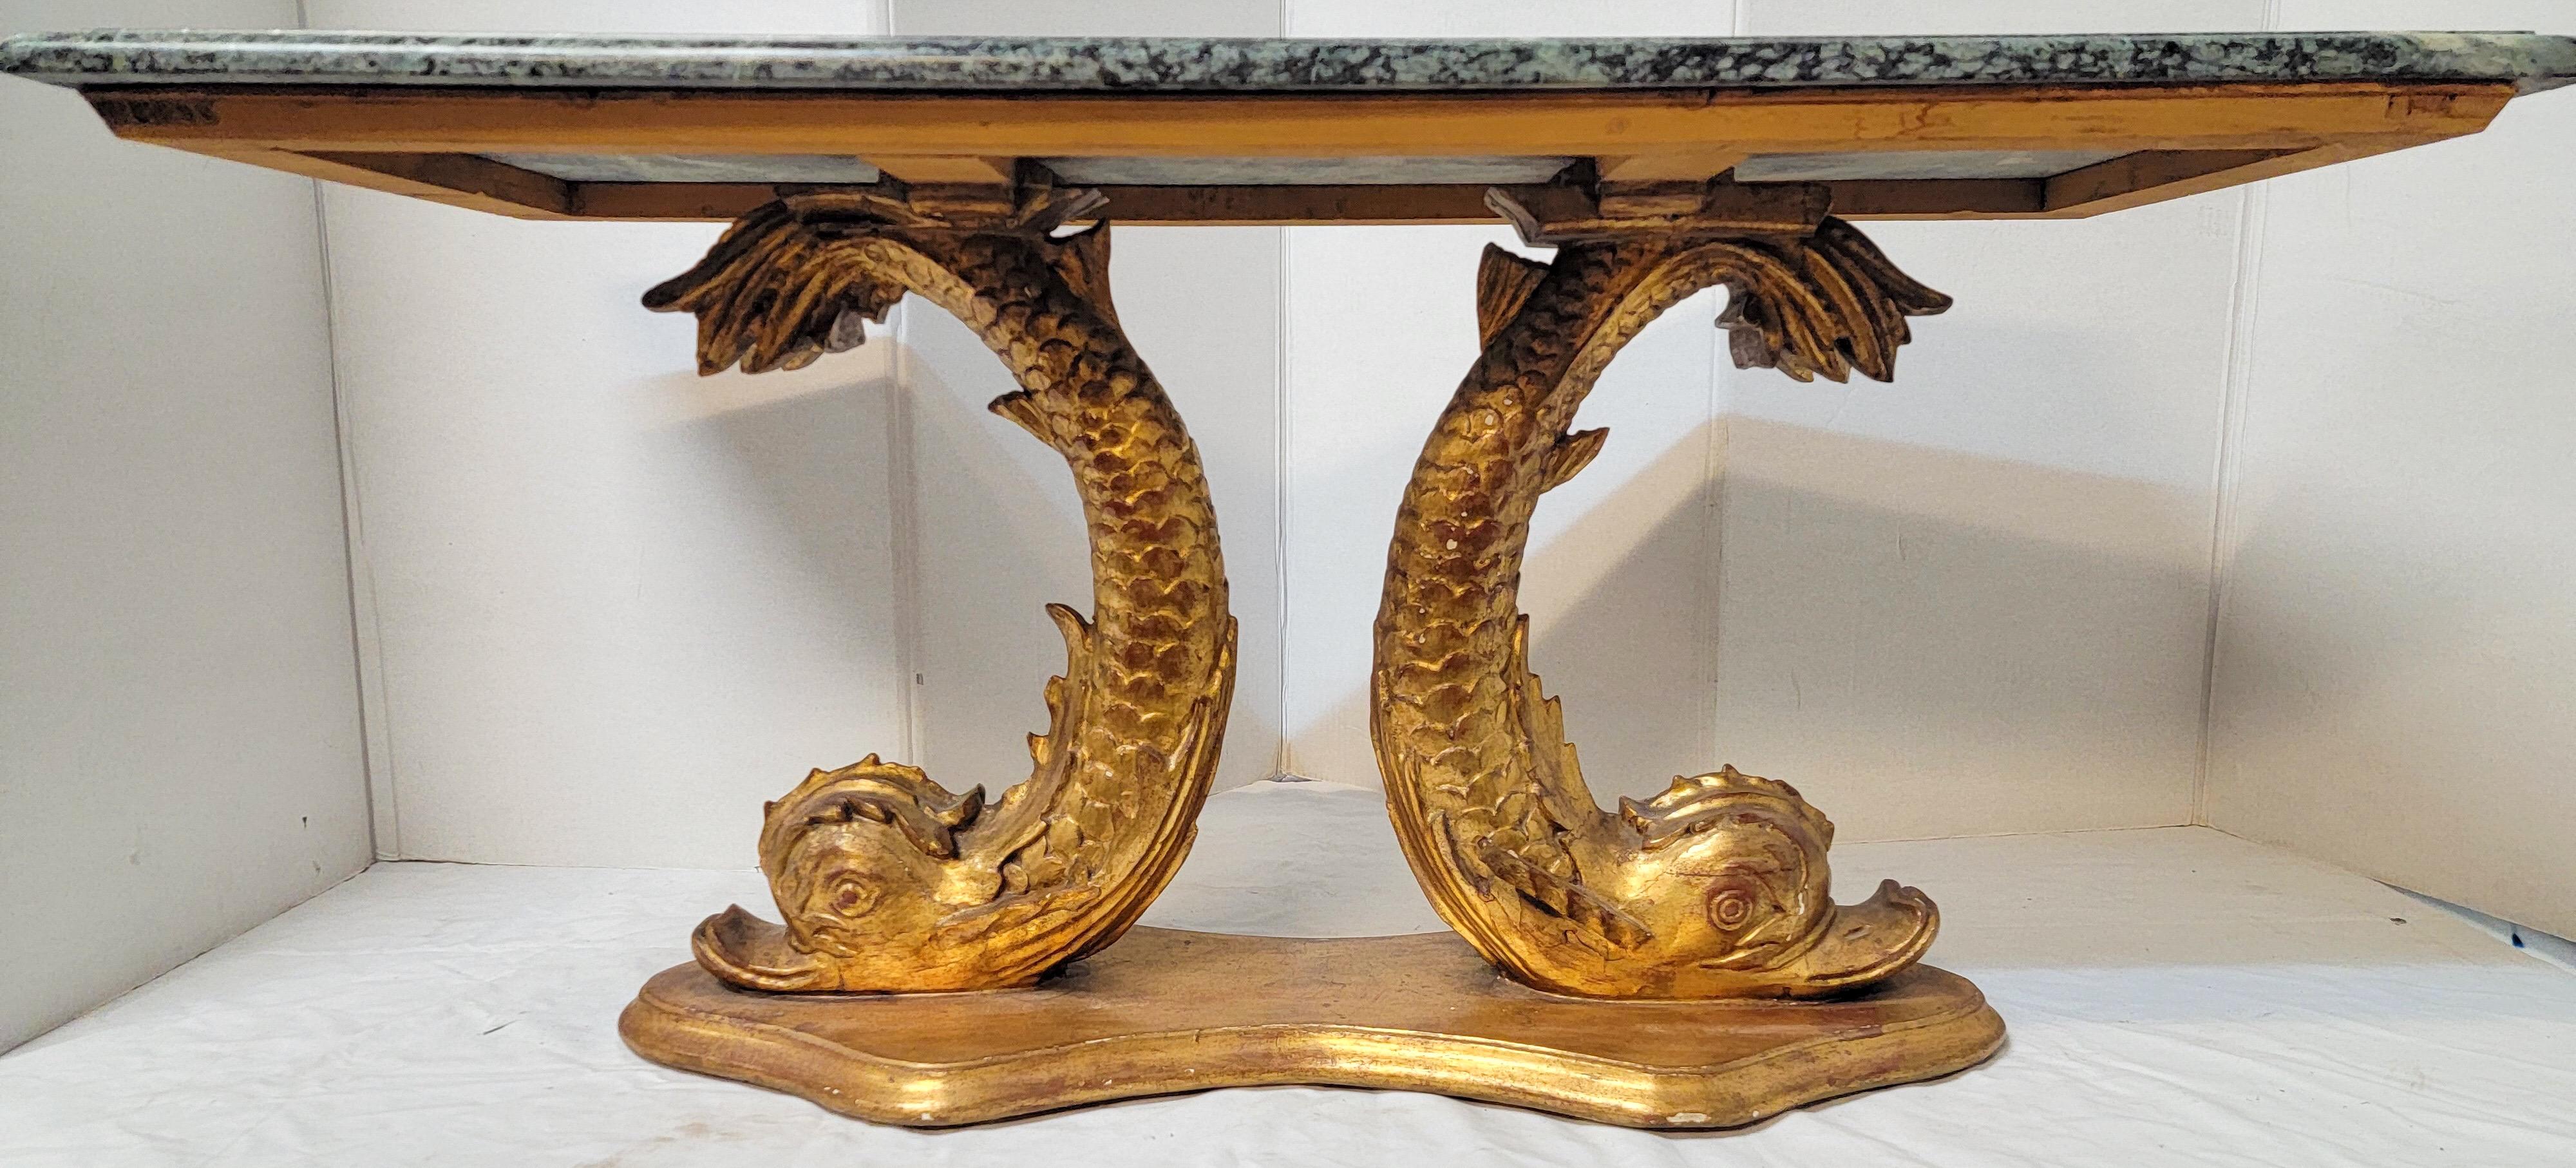 This is a wonderful neo-classical style carved giltwood koi fish coffee table or bench with a green veined marble top. The giltwood frame is marked and in very good condition. The piece dates to the 1960s. Thereis a larger available as well.